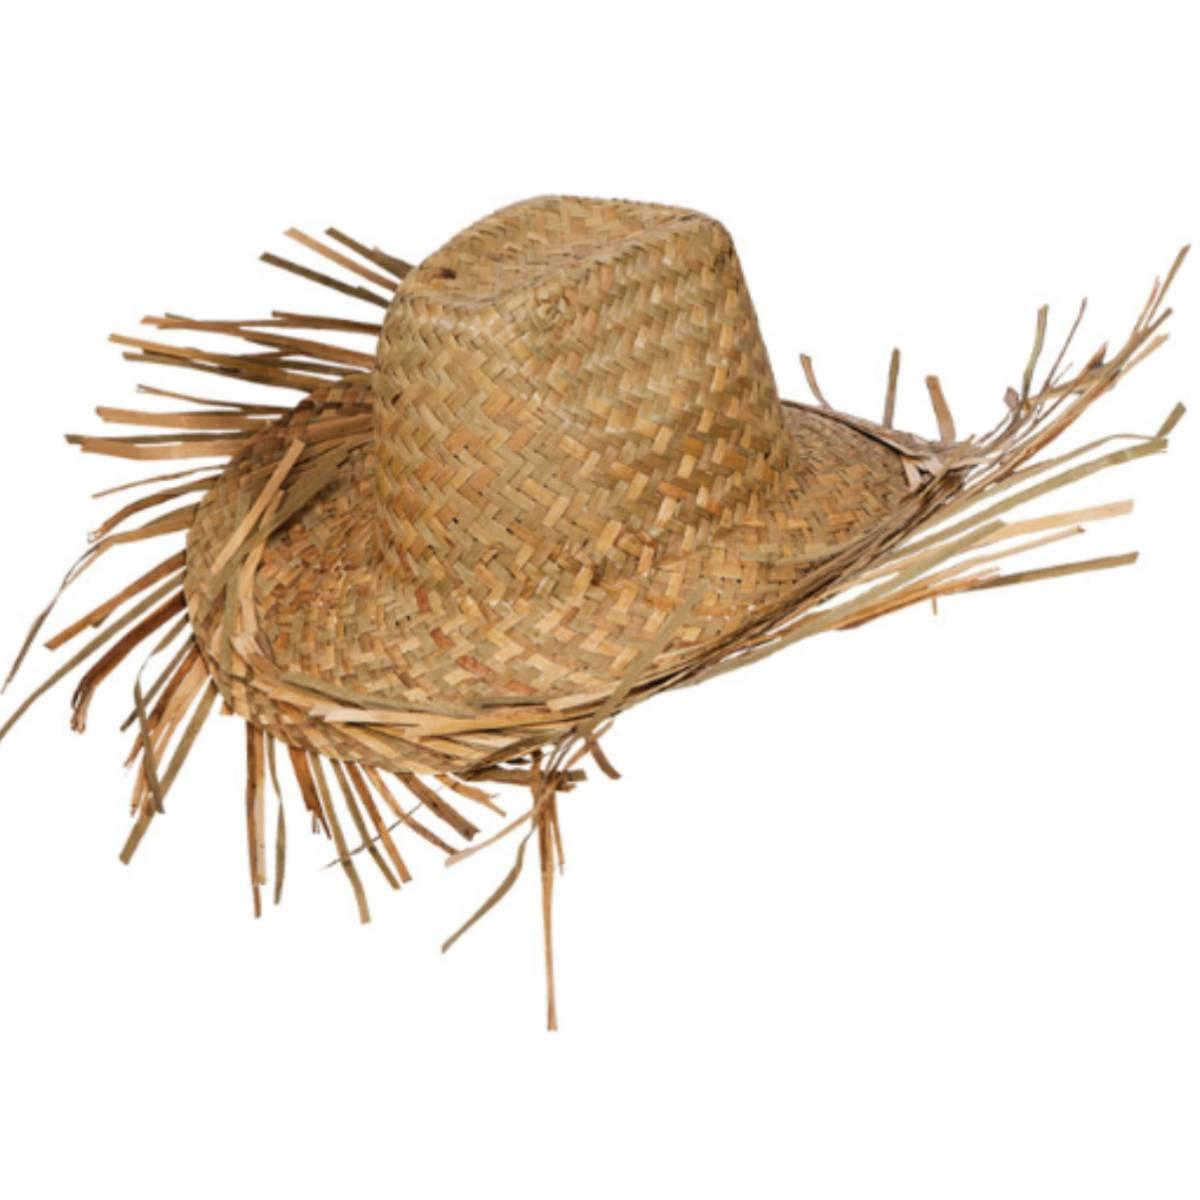 Beachcomber straw hat for luaus and summer parties AC-9156 available here at Karnival Costumes online party shop